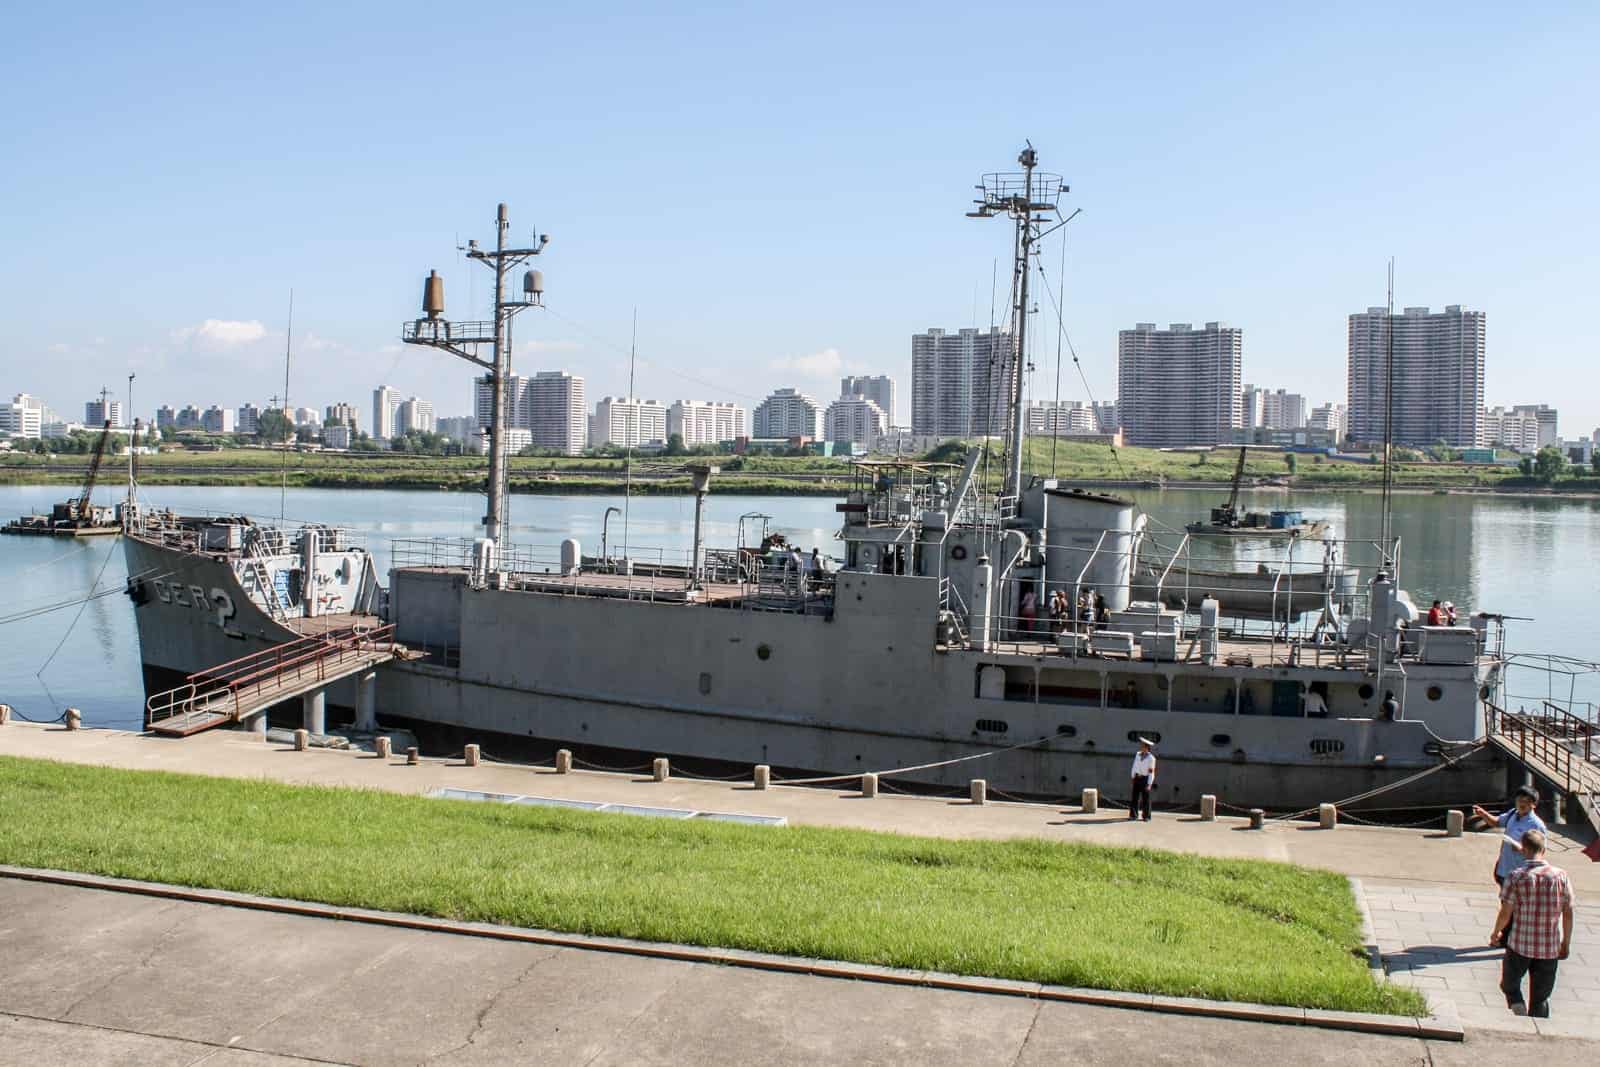 Captured ship US Pablo shown to tourists in Pyongyang on a North Korea tour